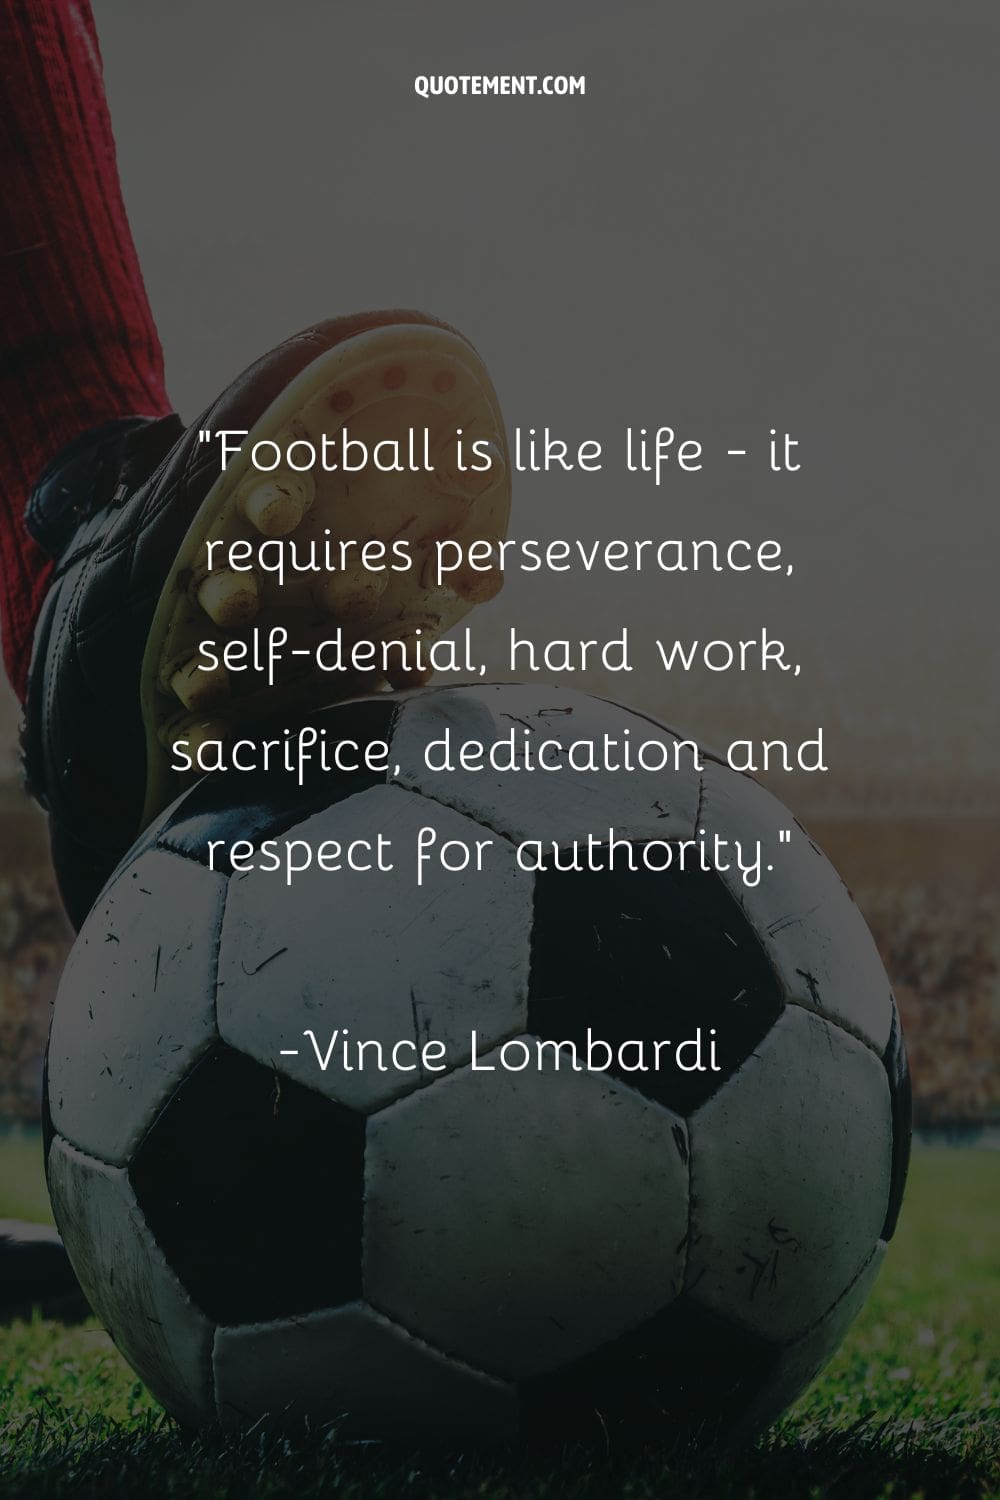 a soccer player's foot against the ball representing best soccer quote